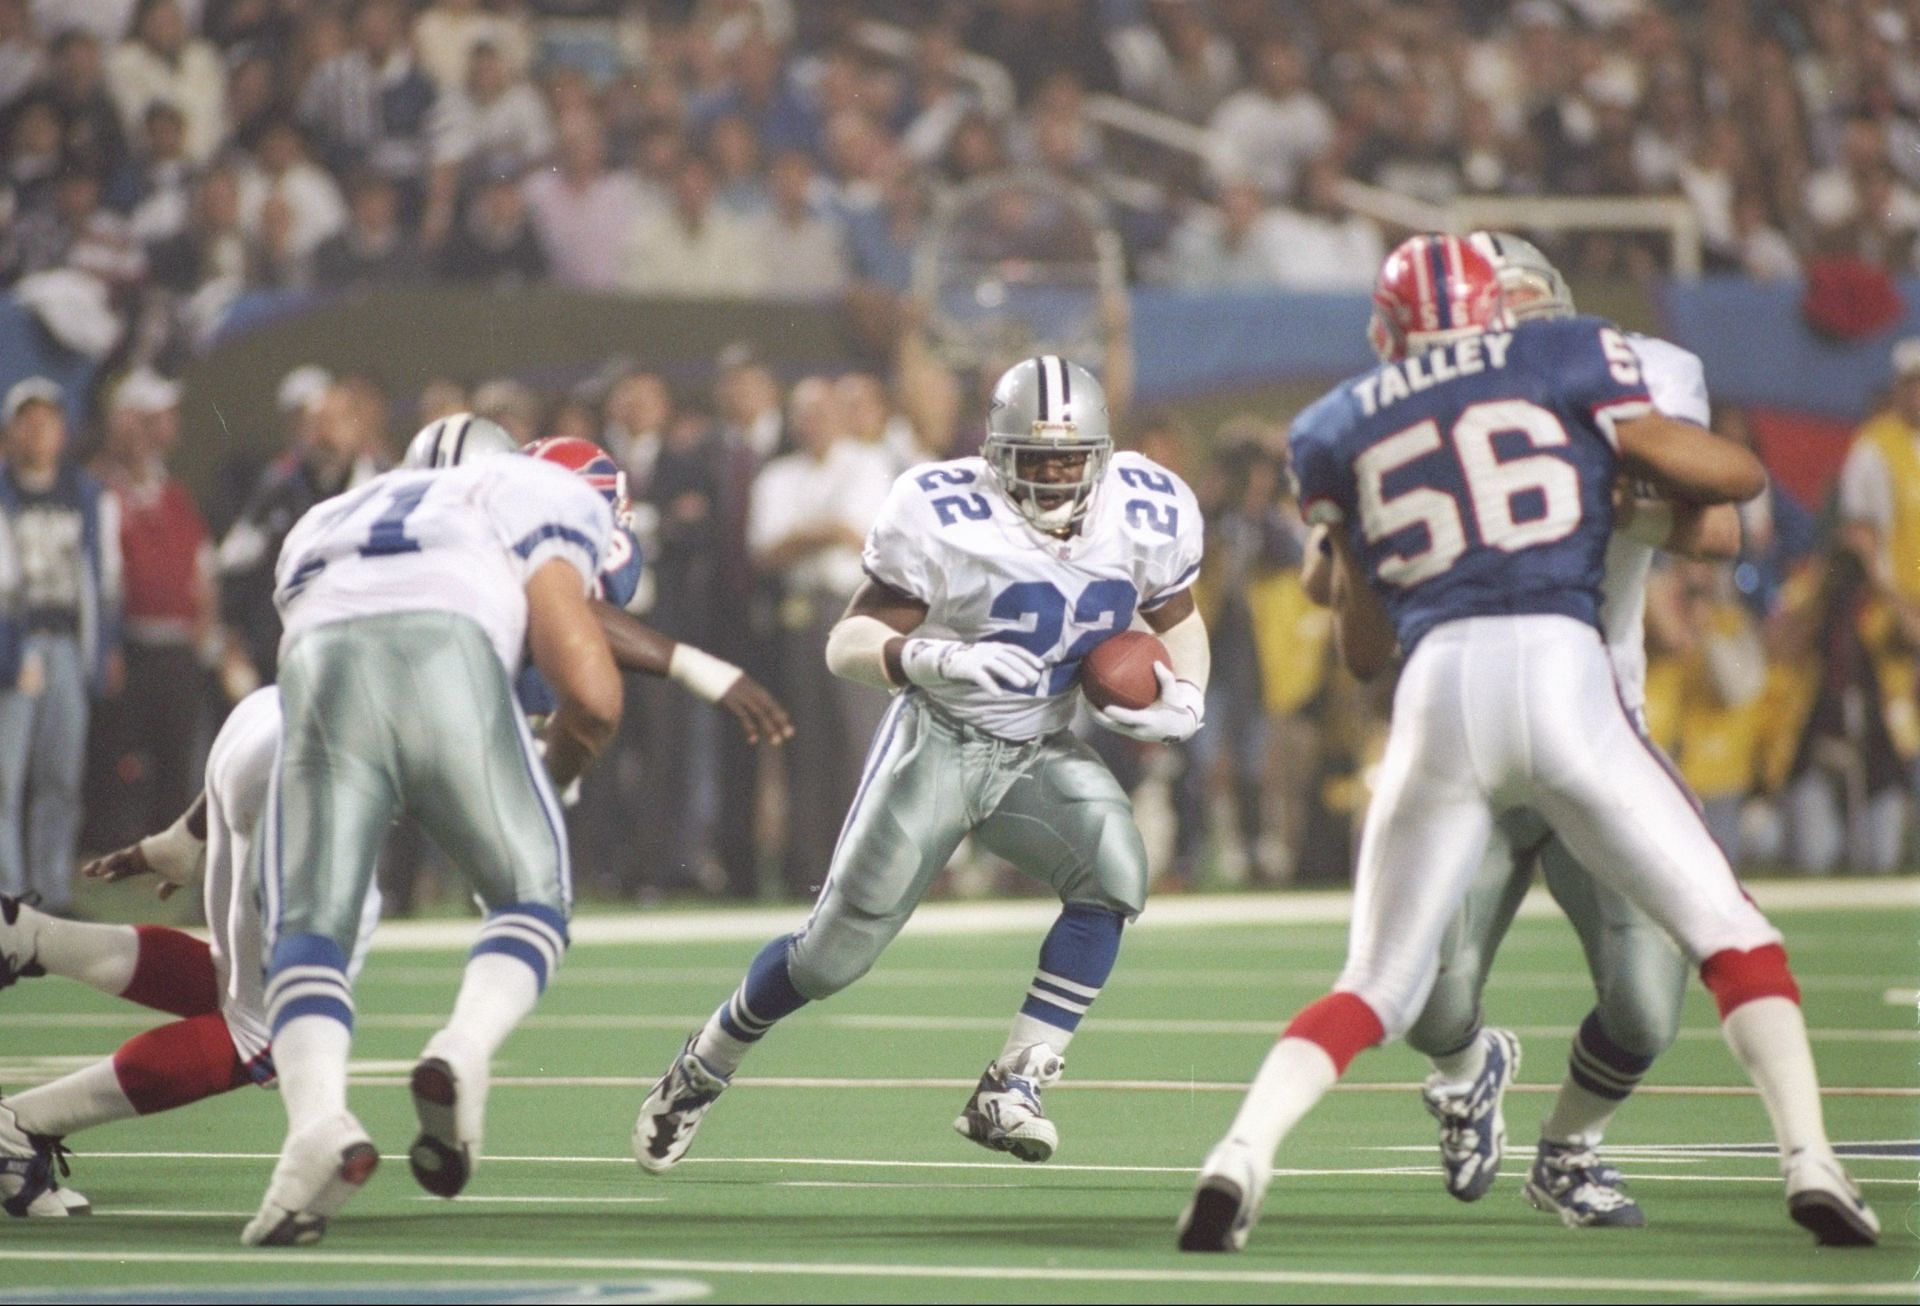 Emmitt Smith (22) on the run during his MVP performance in Super Bowl XXVIII (Photo: Getty)